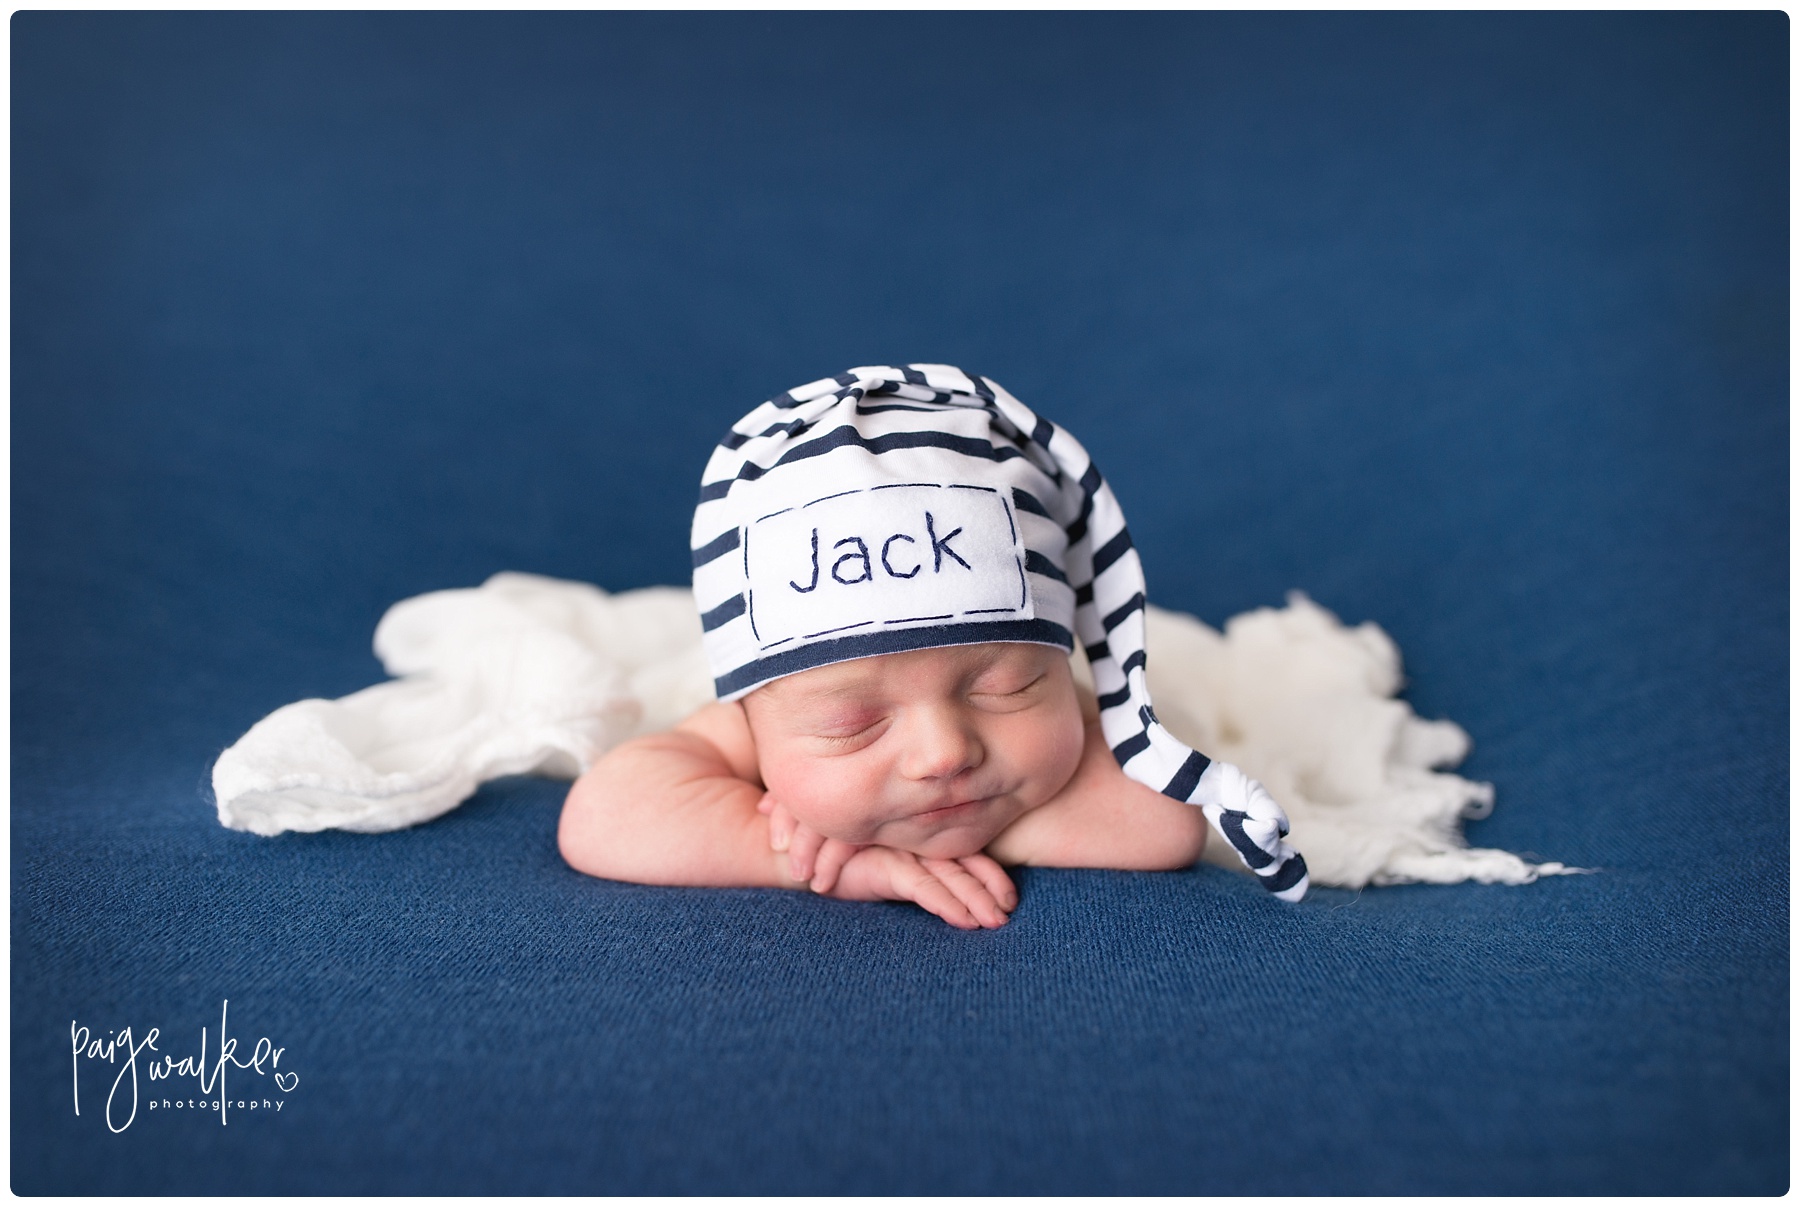 Jack laying on his hands on a navy blanket